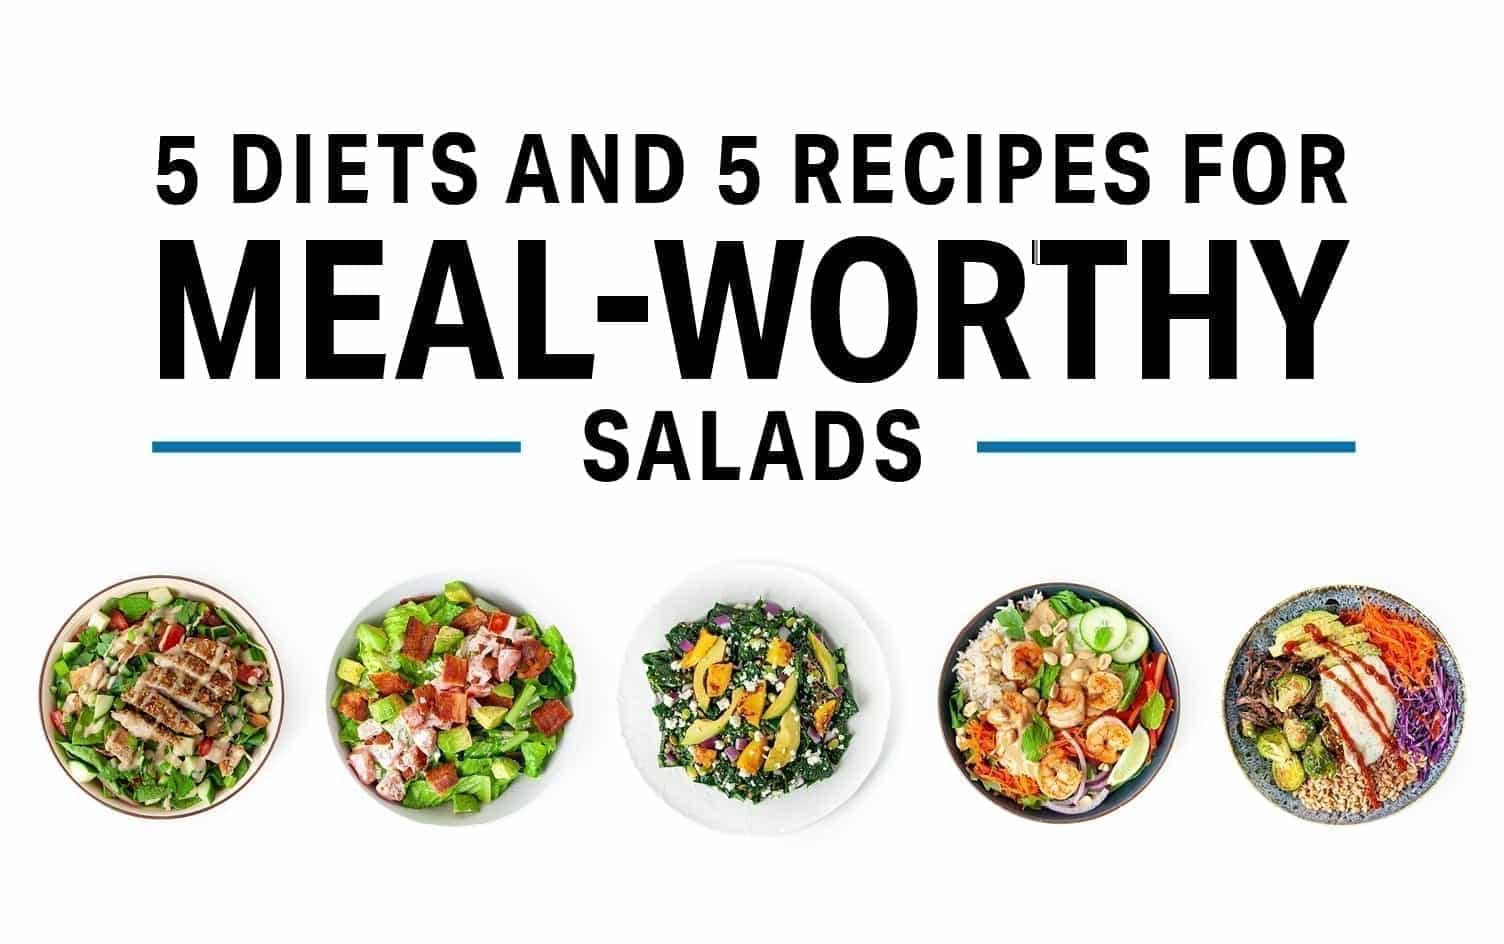 5 Diets and 5 Recipes For Meal-Worthy Salads